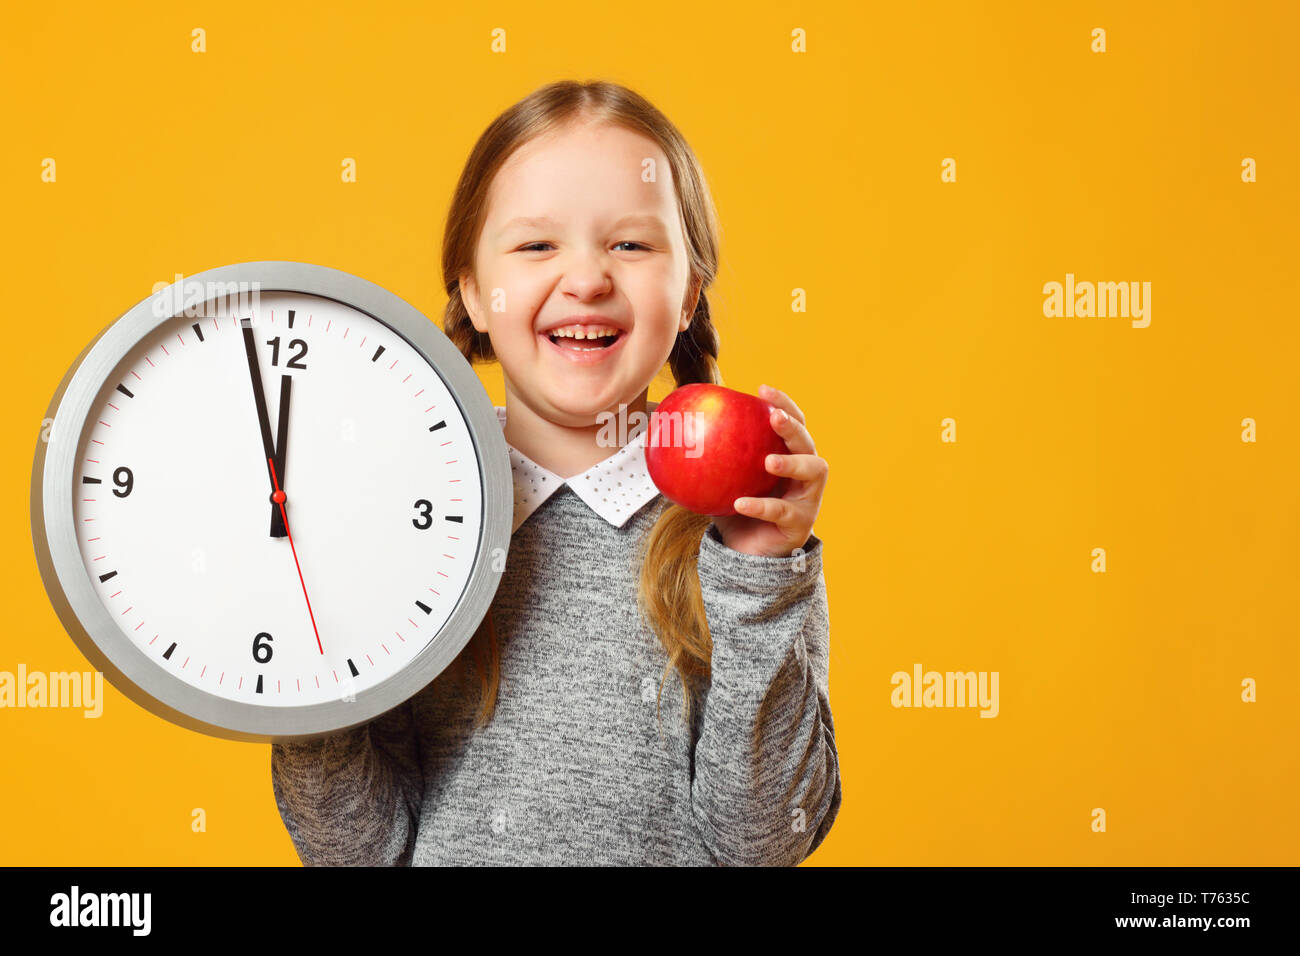 Little girl schoolgirl holds a big clock and a red apple on a yellow background. Break time and lunch. Stock Photo